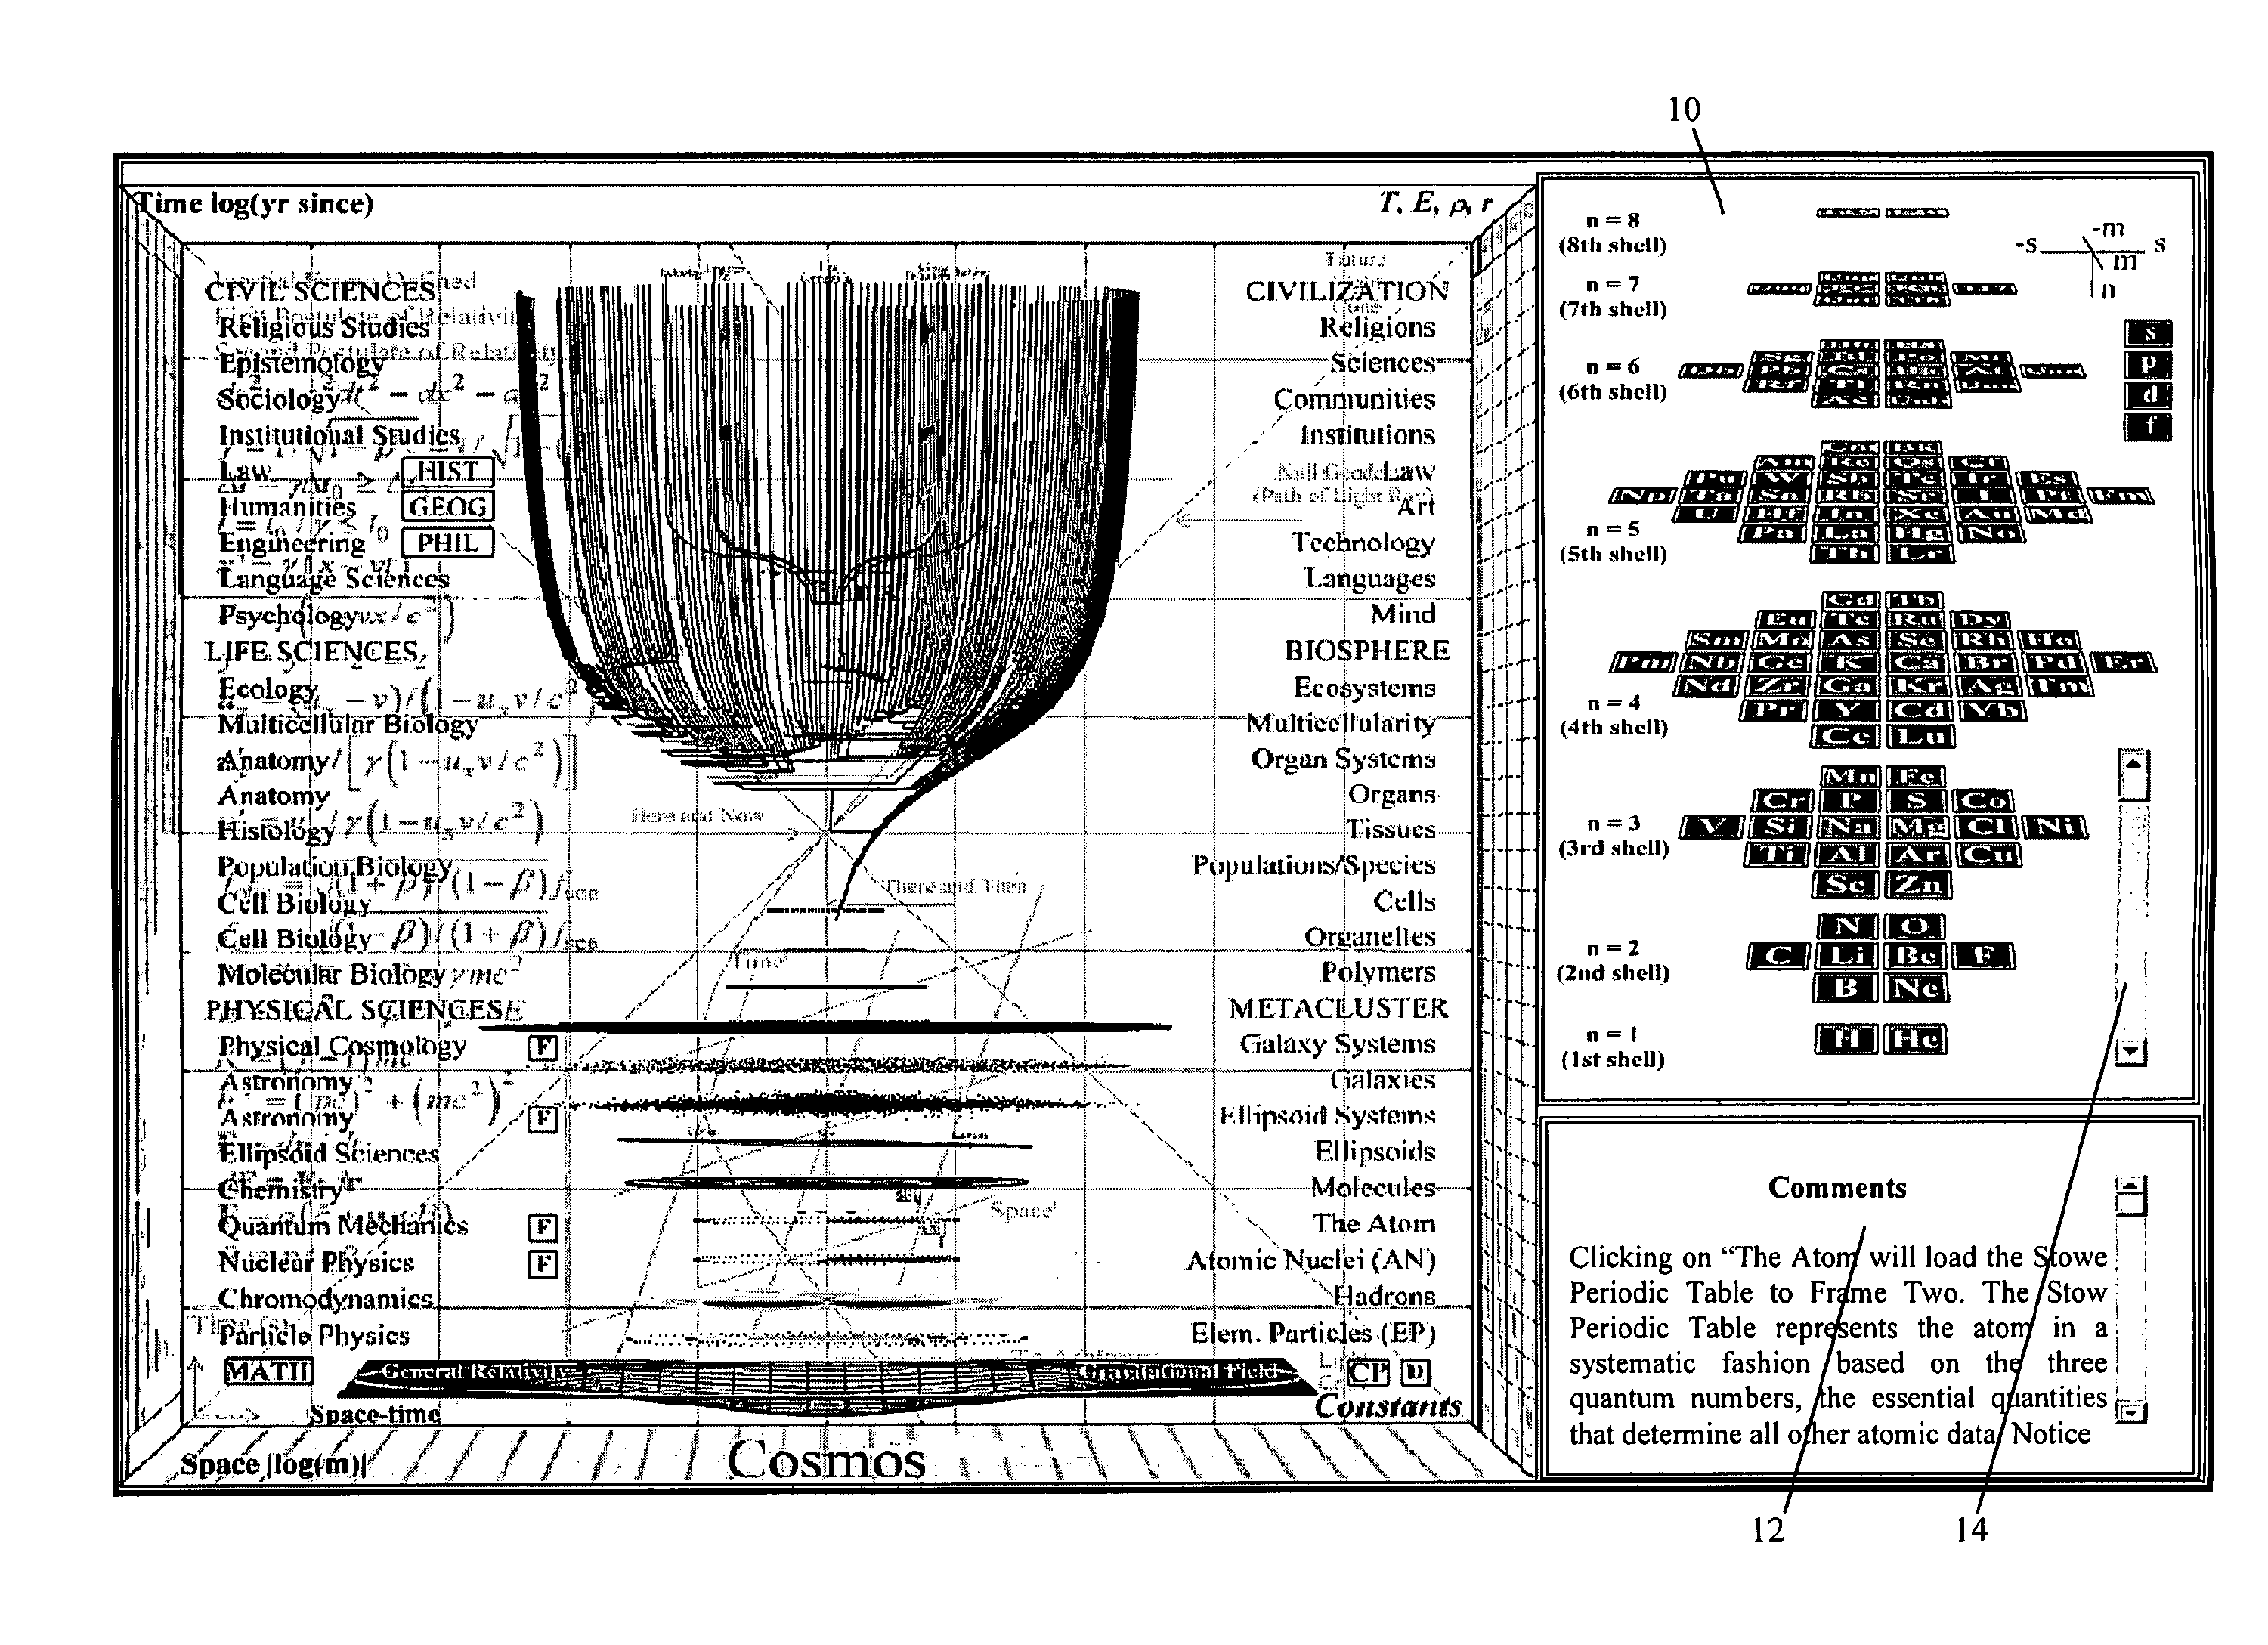 Graphical user interface (GUI) for scientific reference comprising a three-dimentional, multi-framed unification of concept presentations